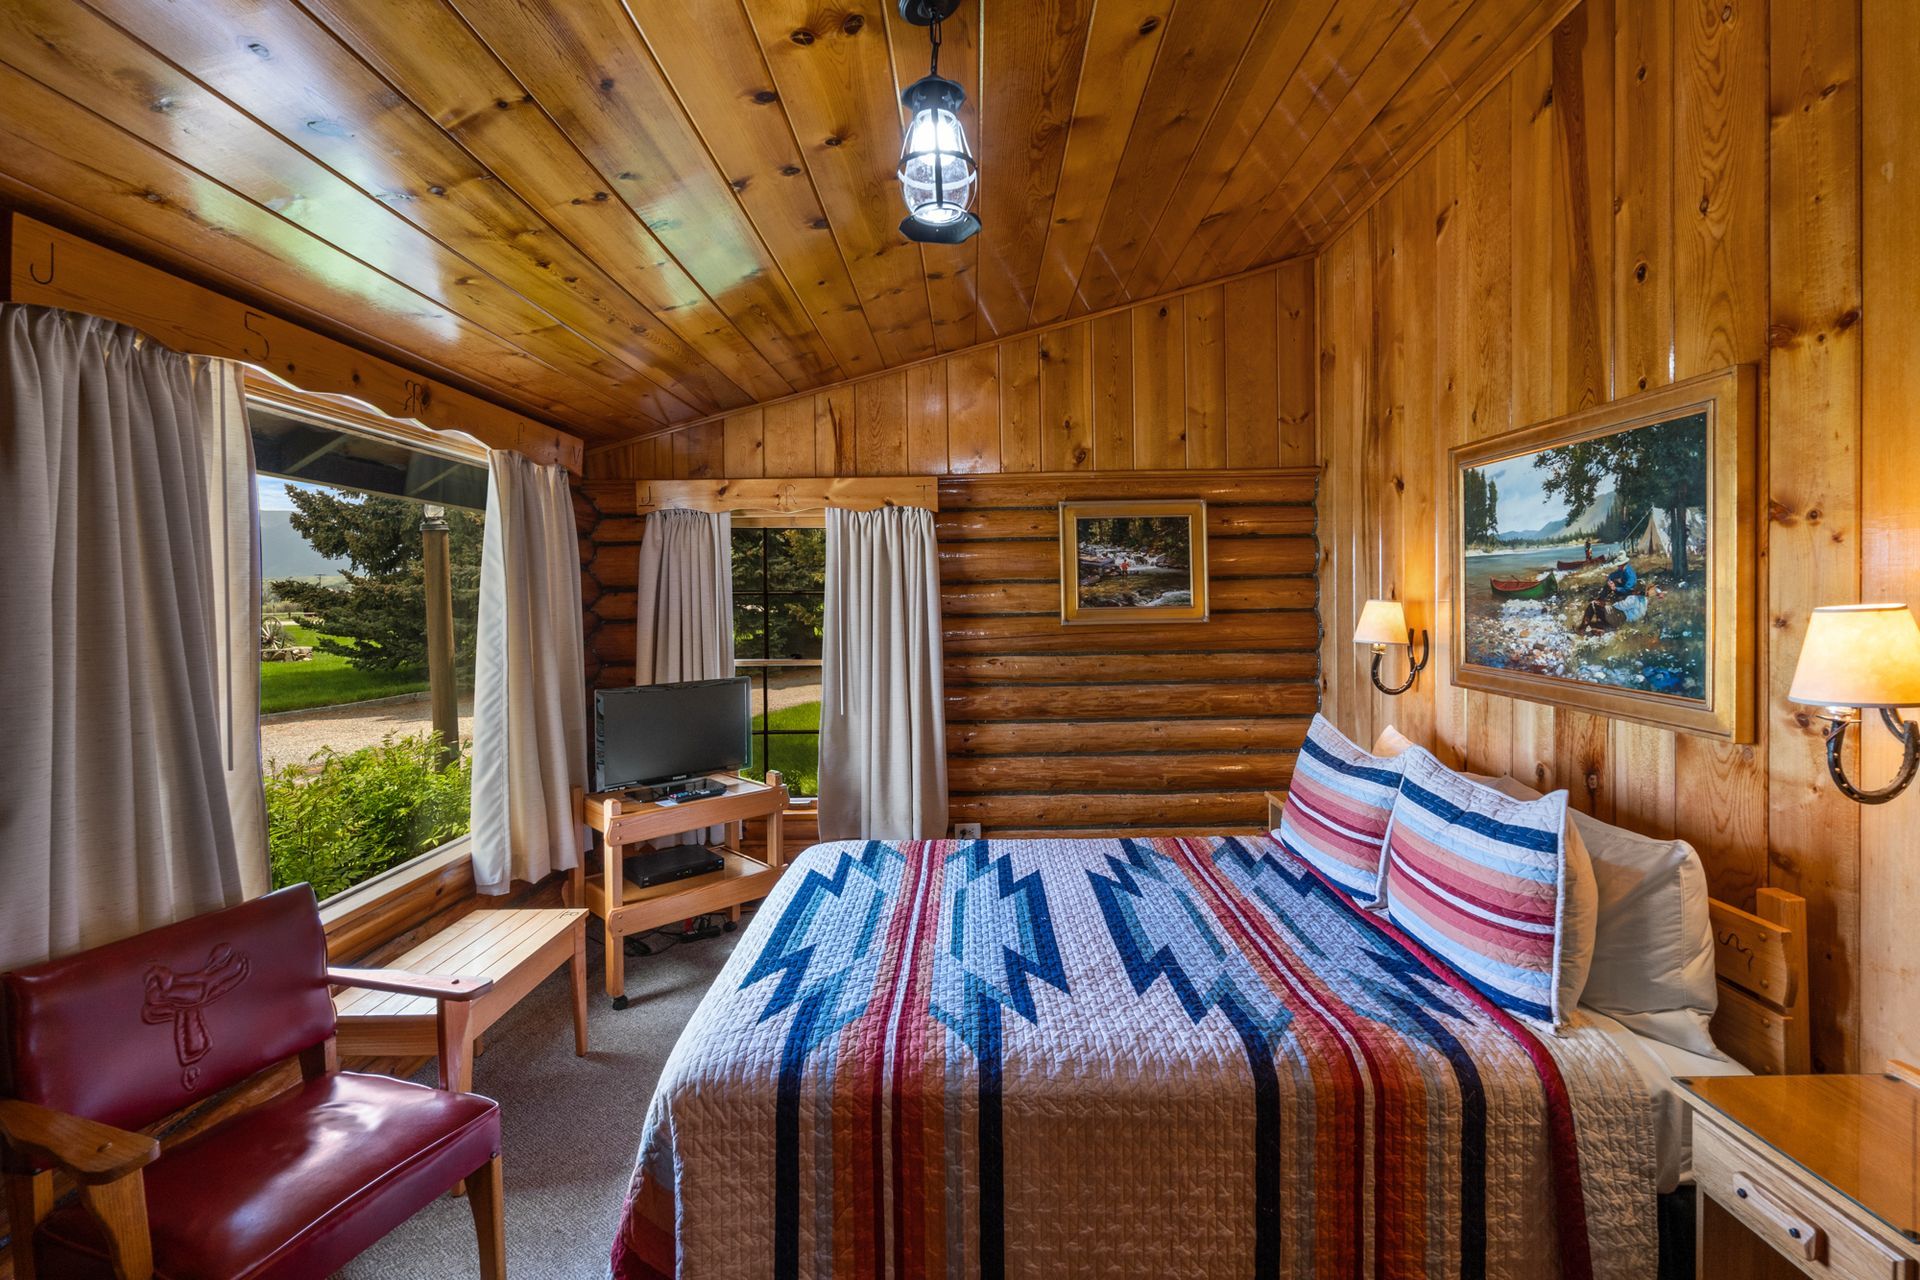 A bedroom in a log cabin with a bed , chair , table and television.